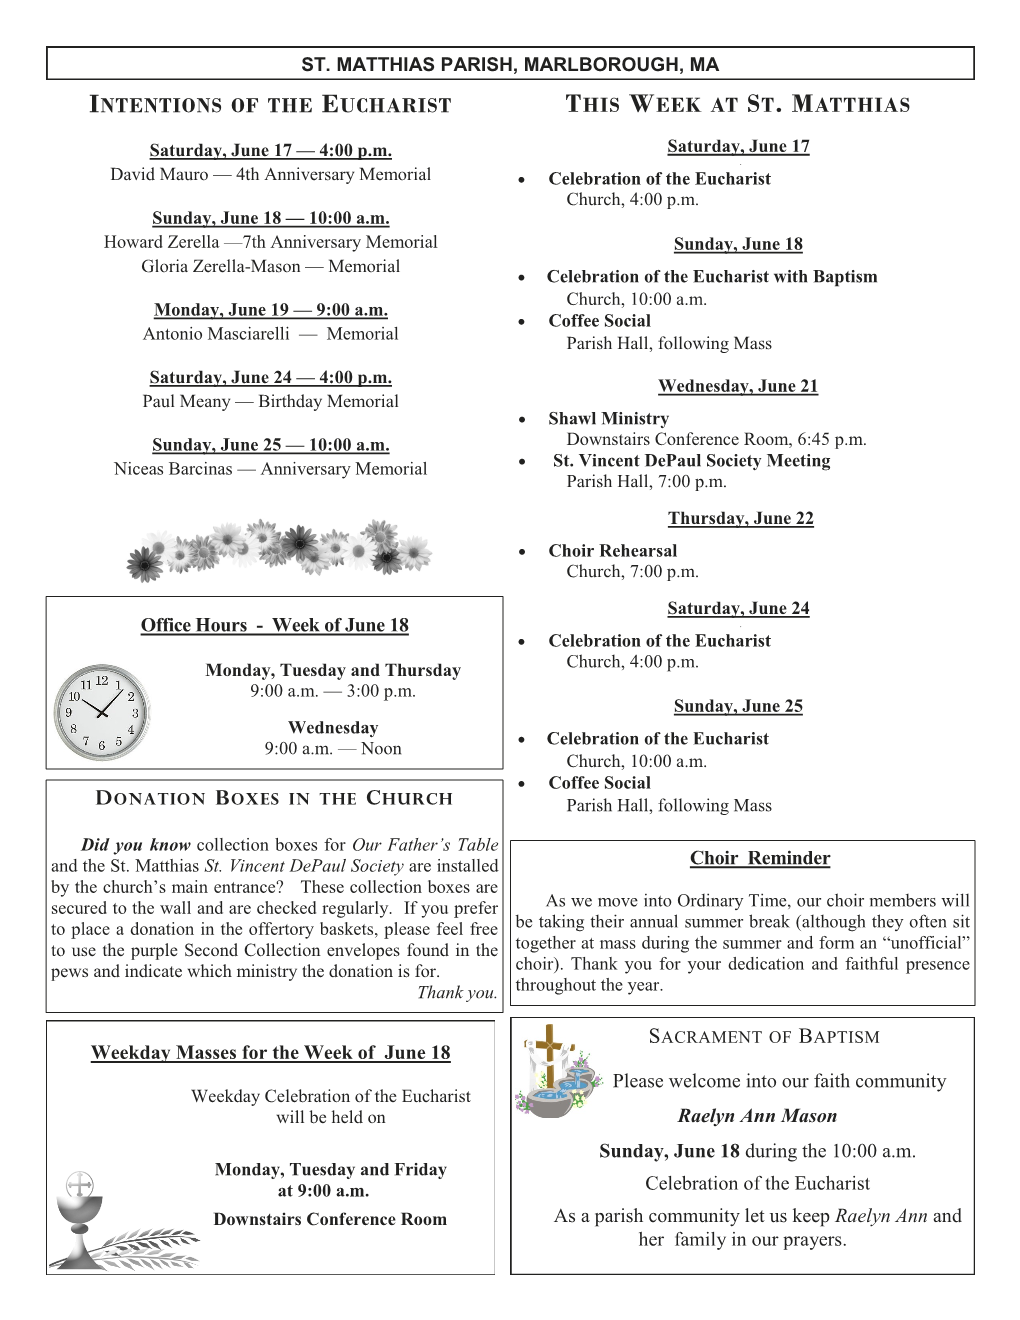 Intentions of the Eucharist This Week at St. Matthias